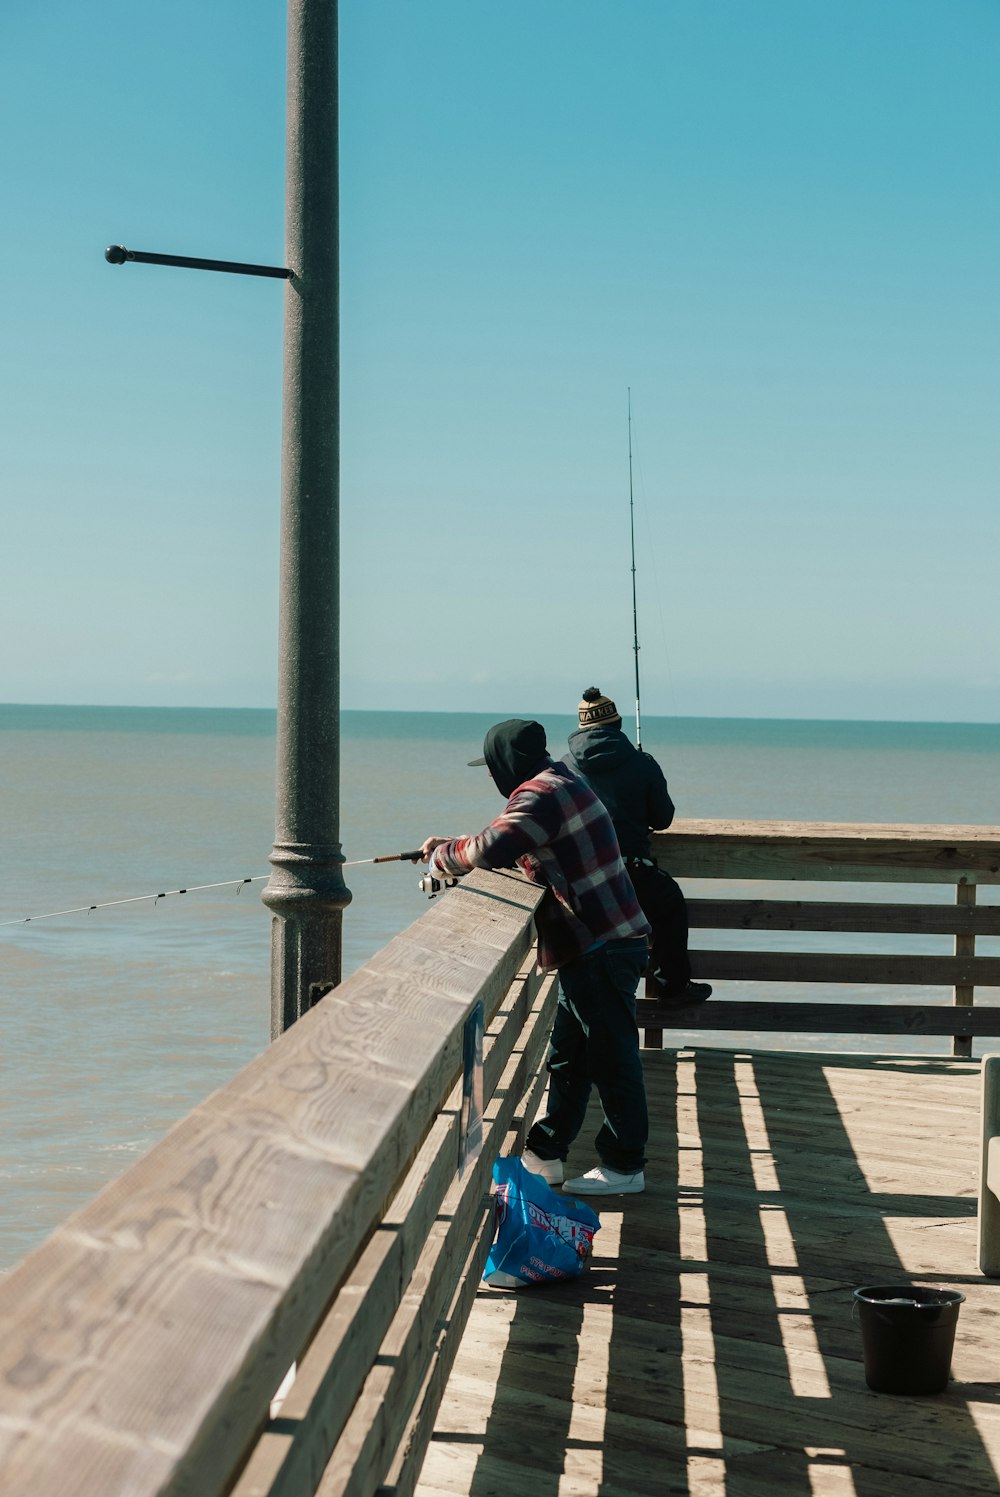 two men fishing on a pier next to the ocean